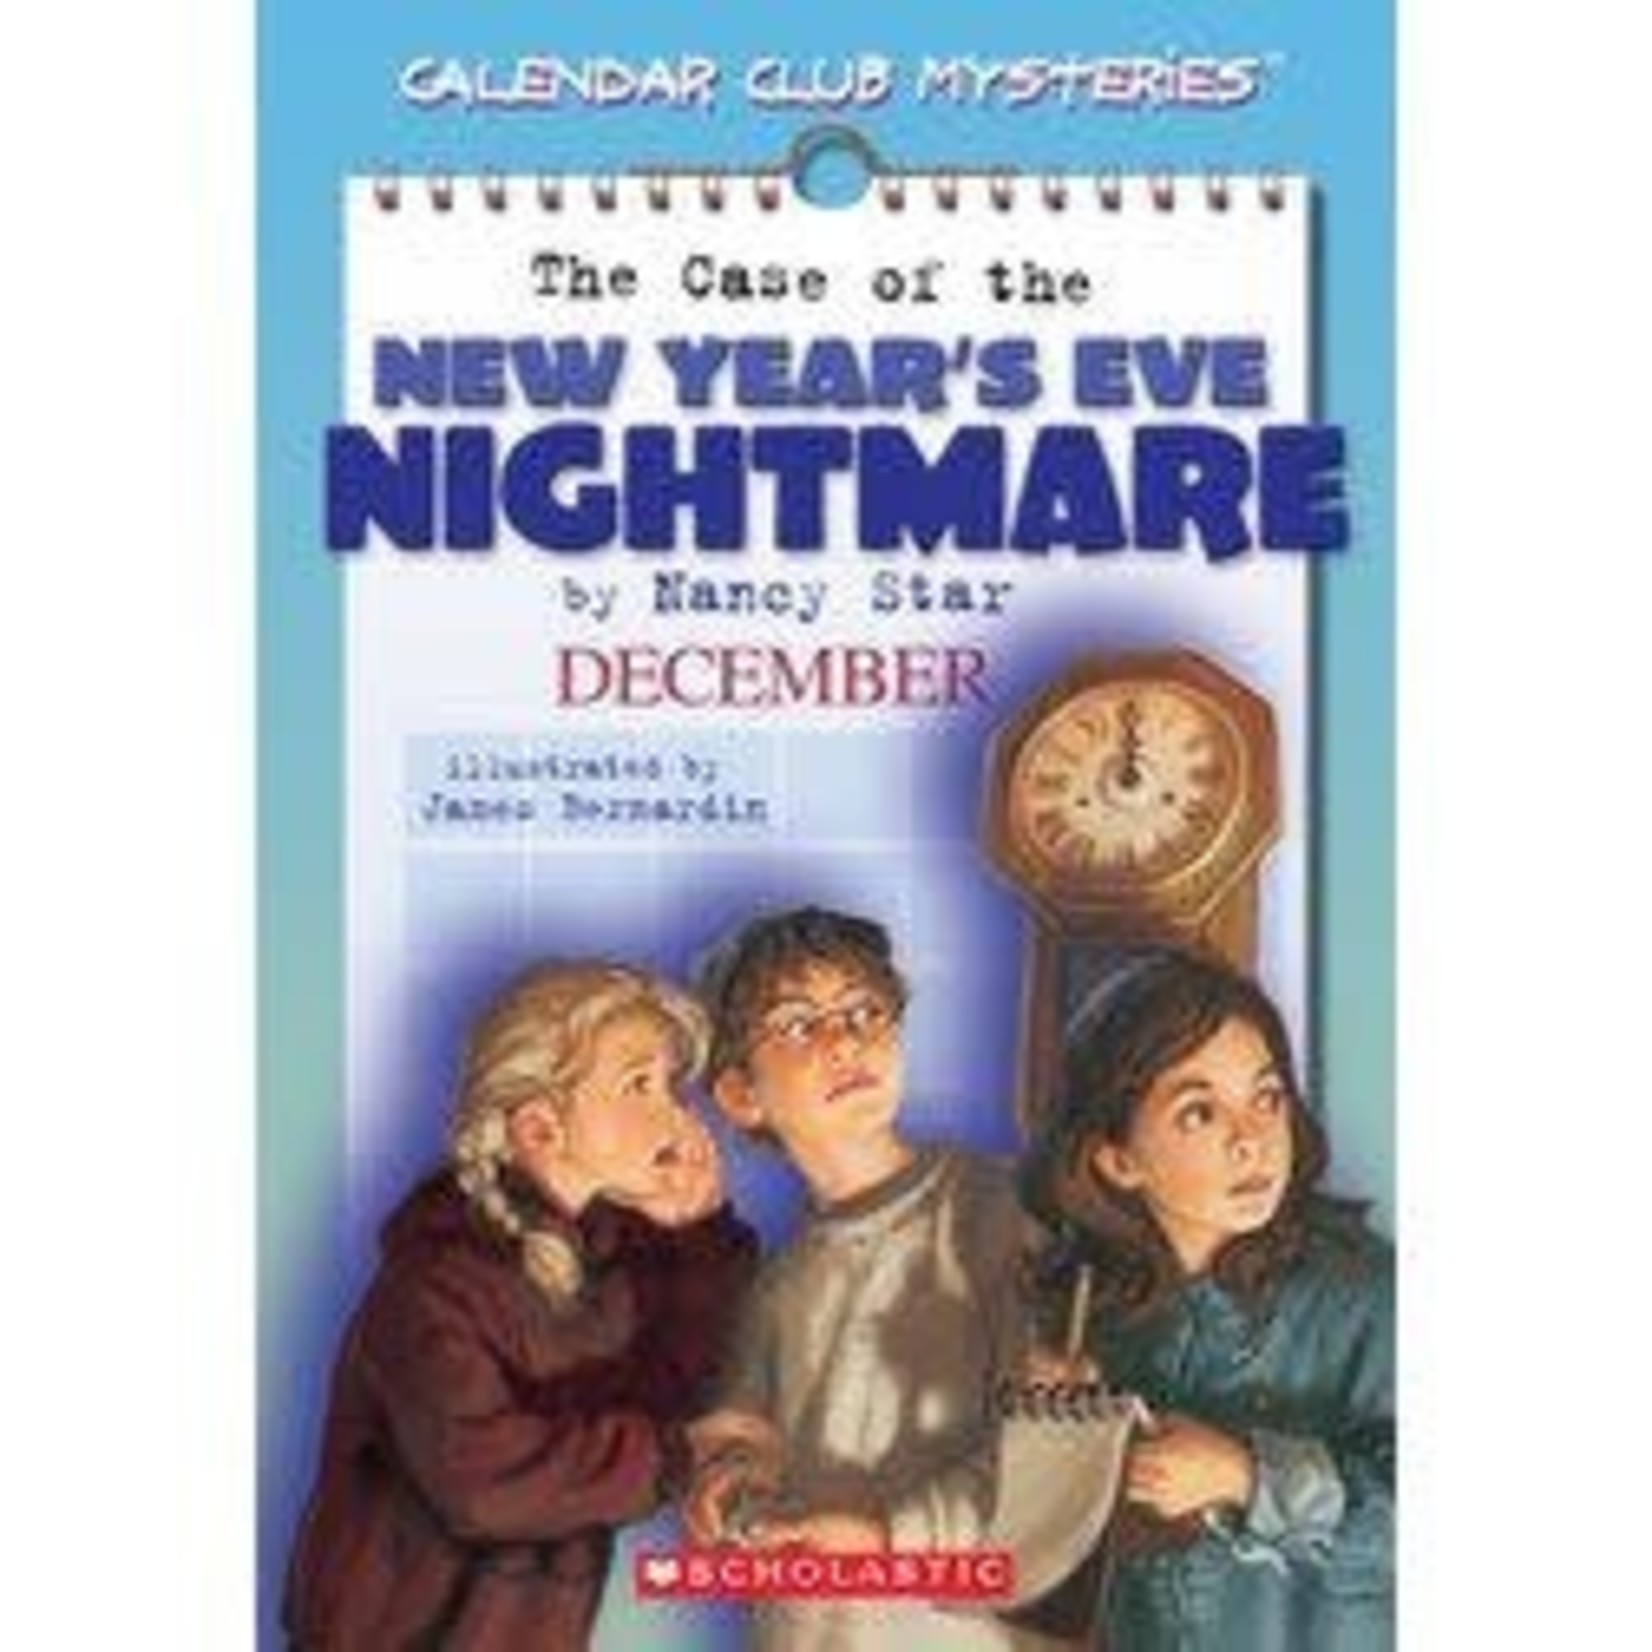 Nancy Star Calender Club Mysteries  The Case of the New Year's Eve Nightmare #6